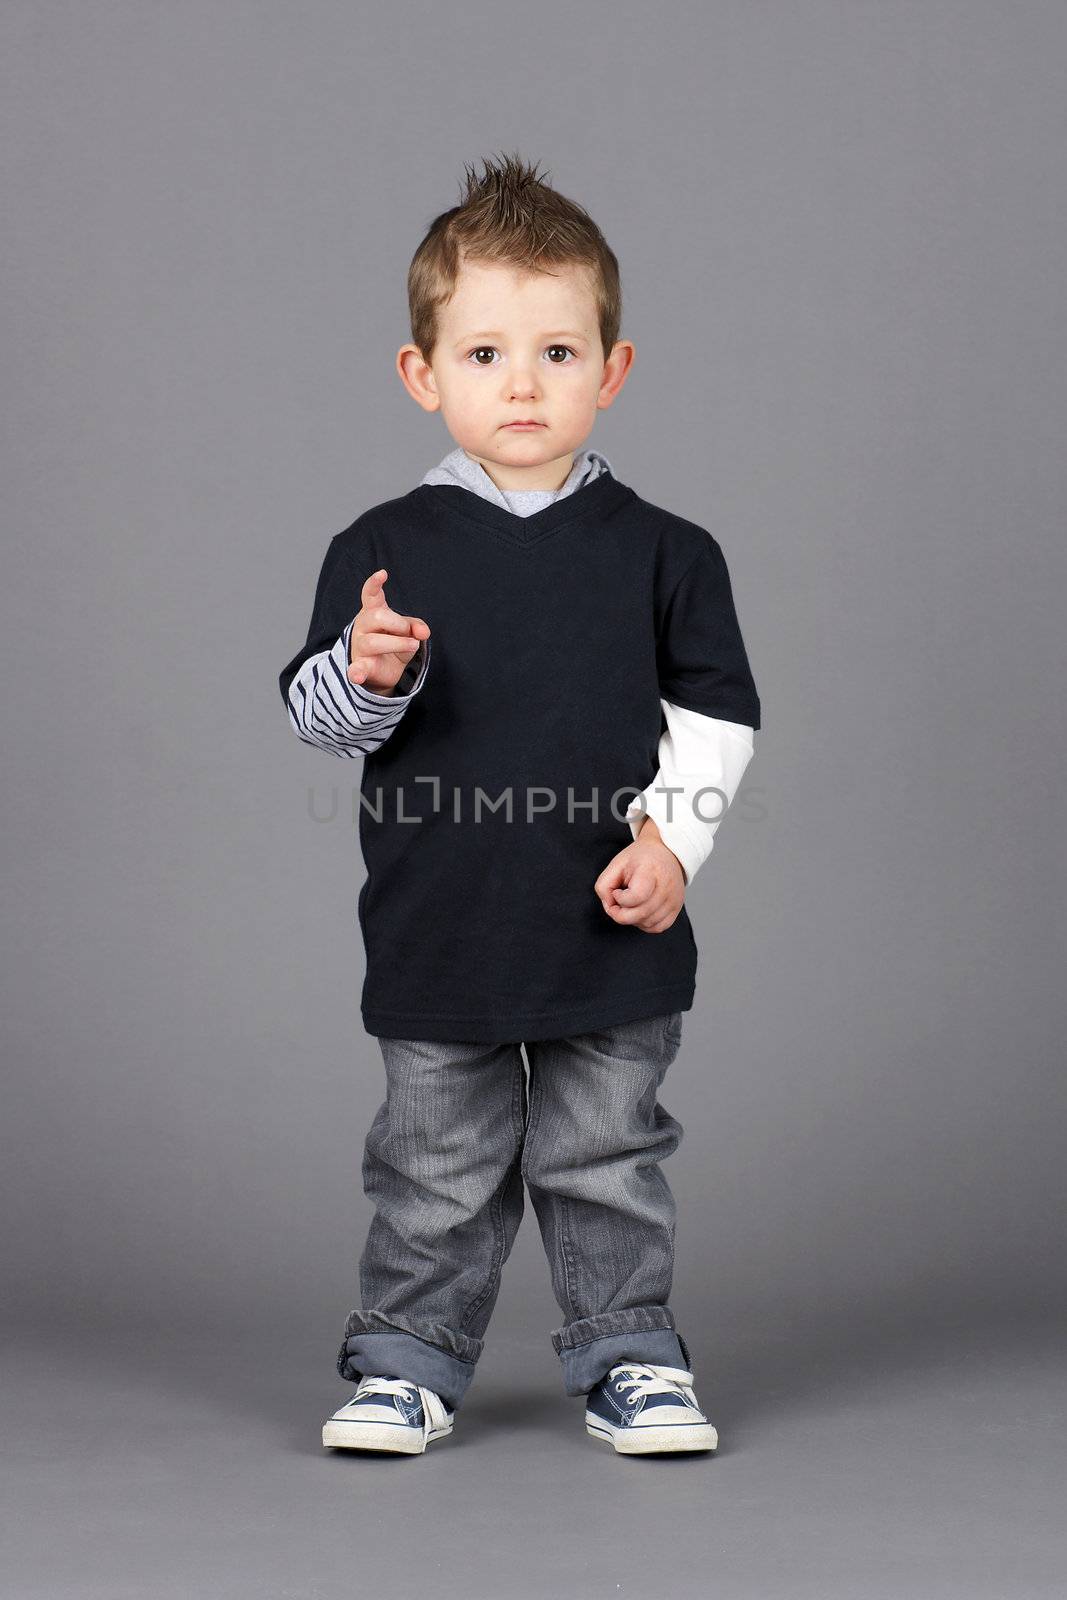 Little boy pointing by Mirage3